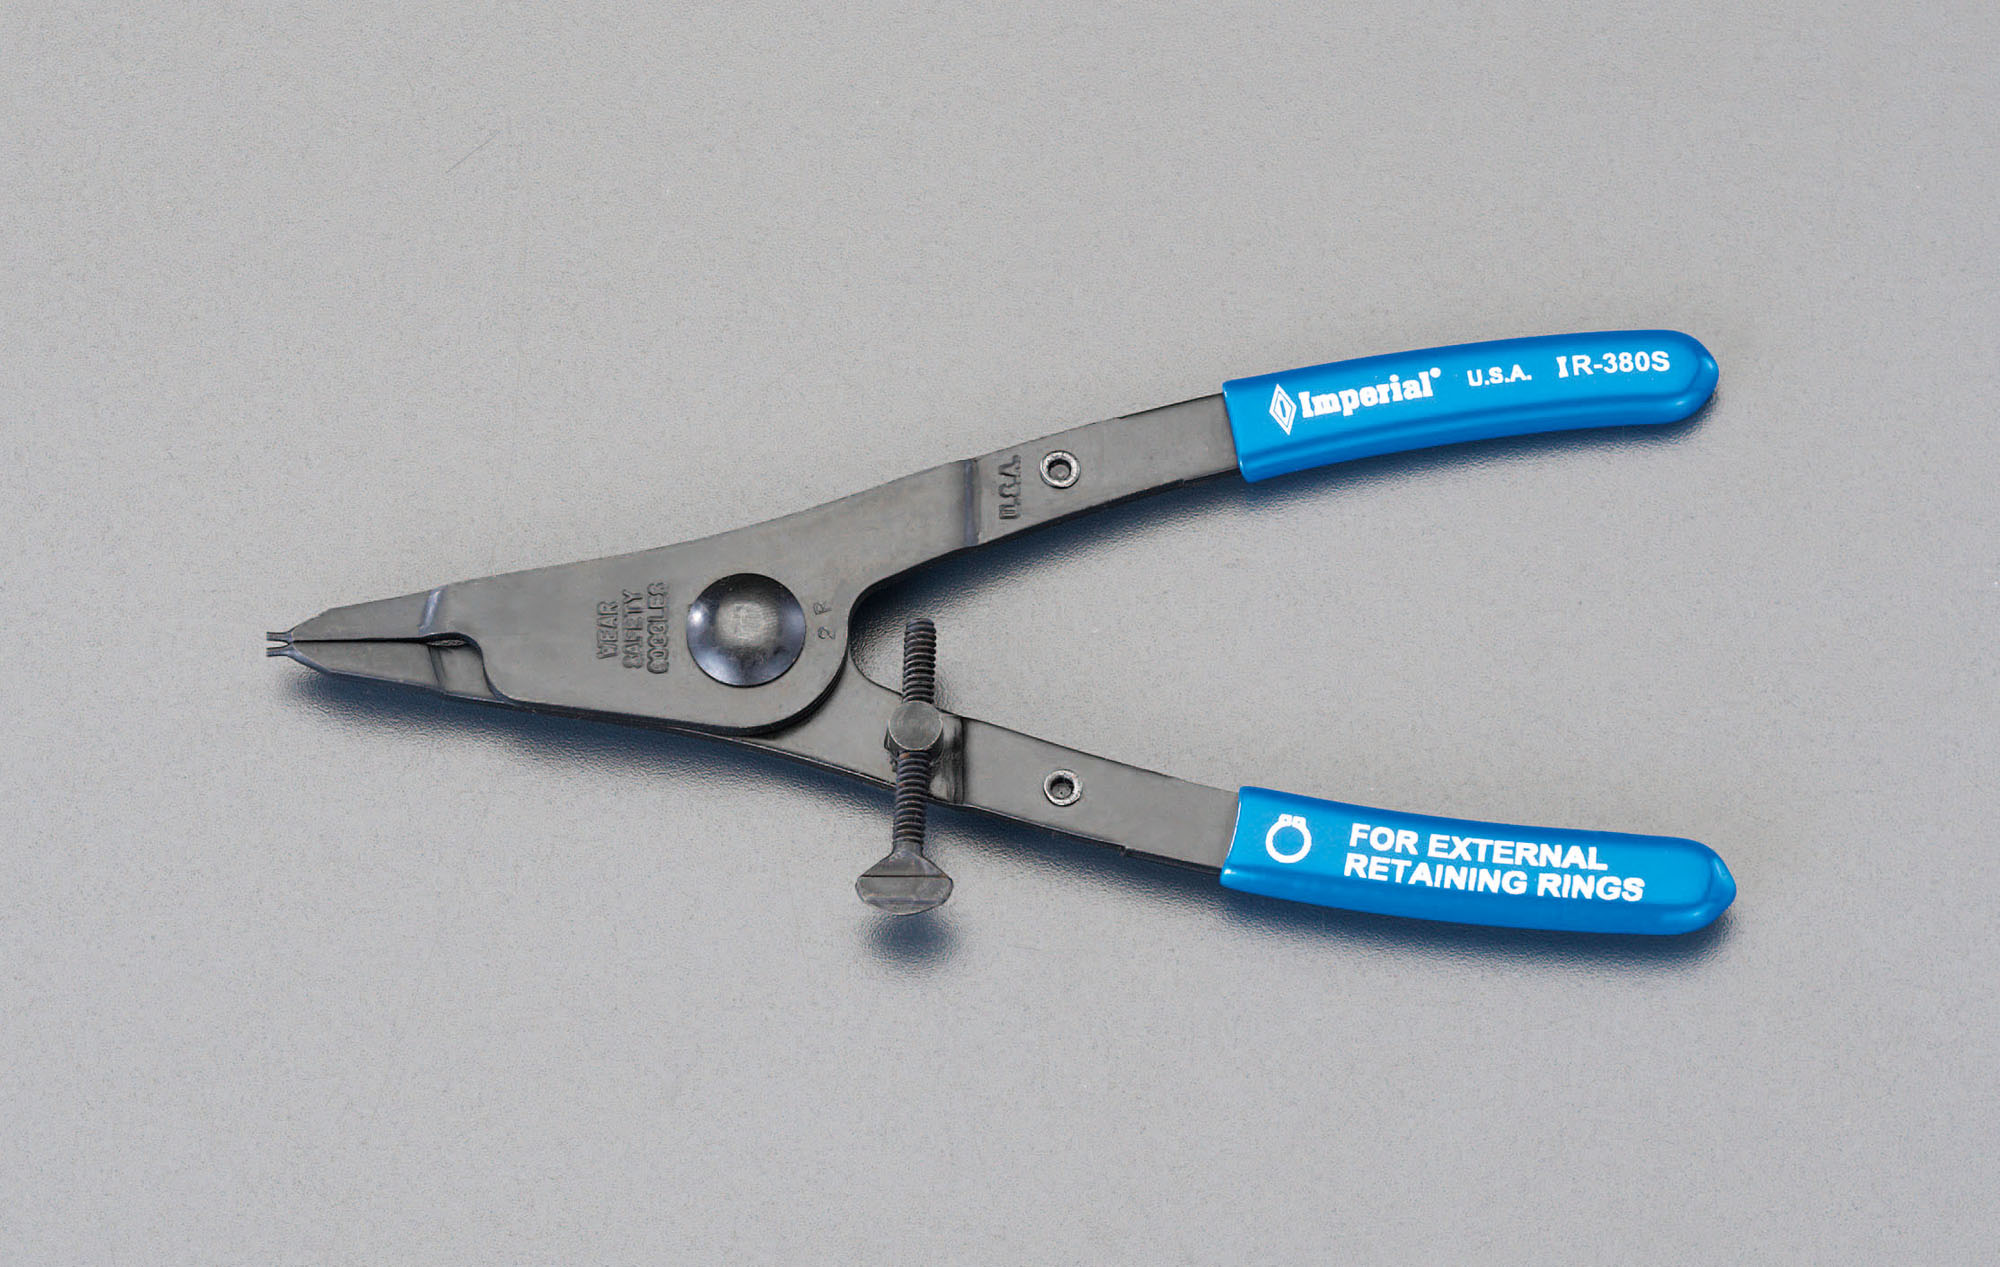 Imperial 7090 Snap Ring Plier - 90 Degree Tip